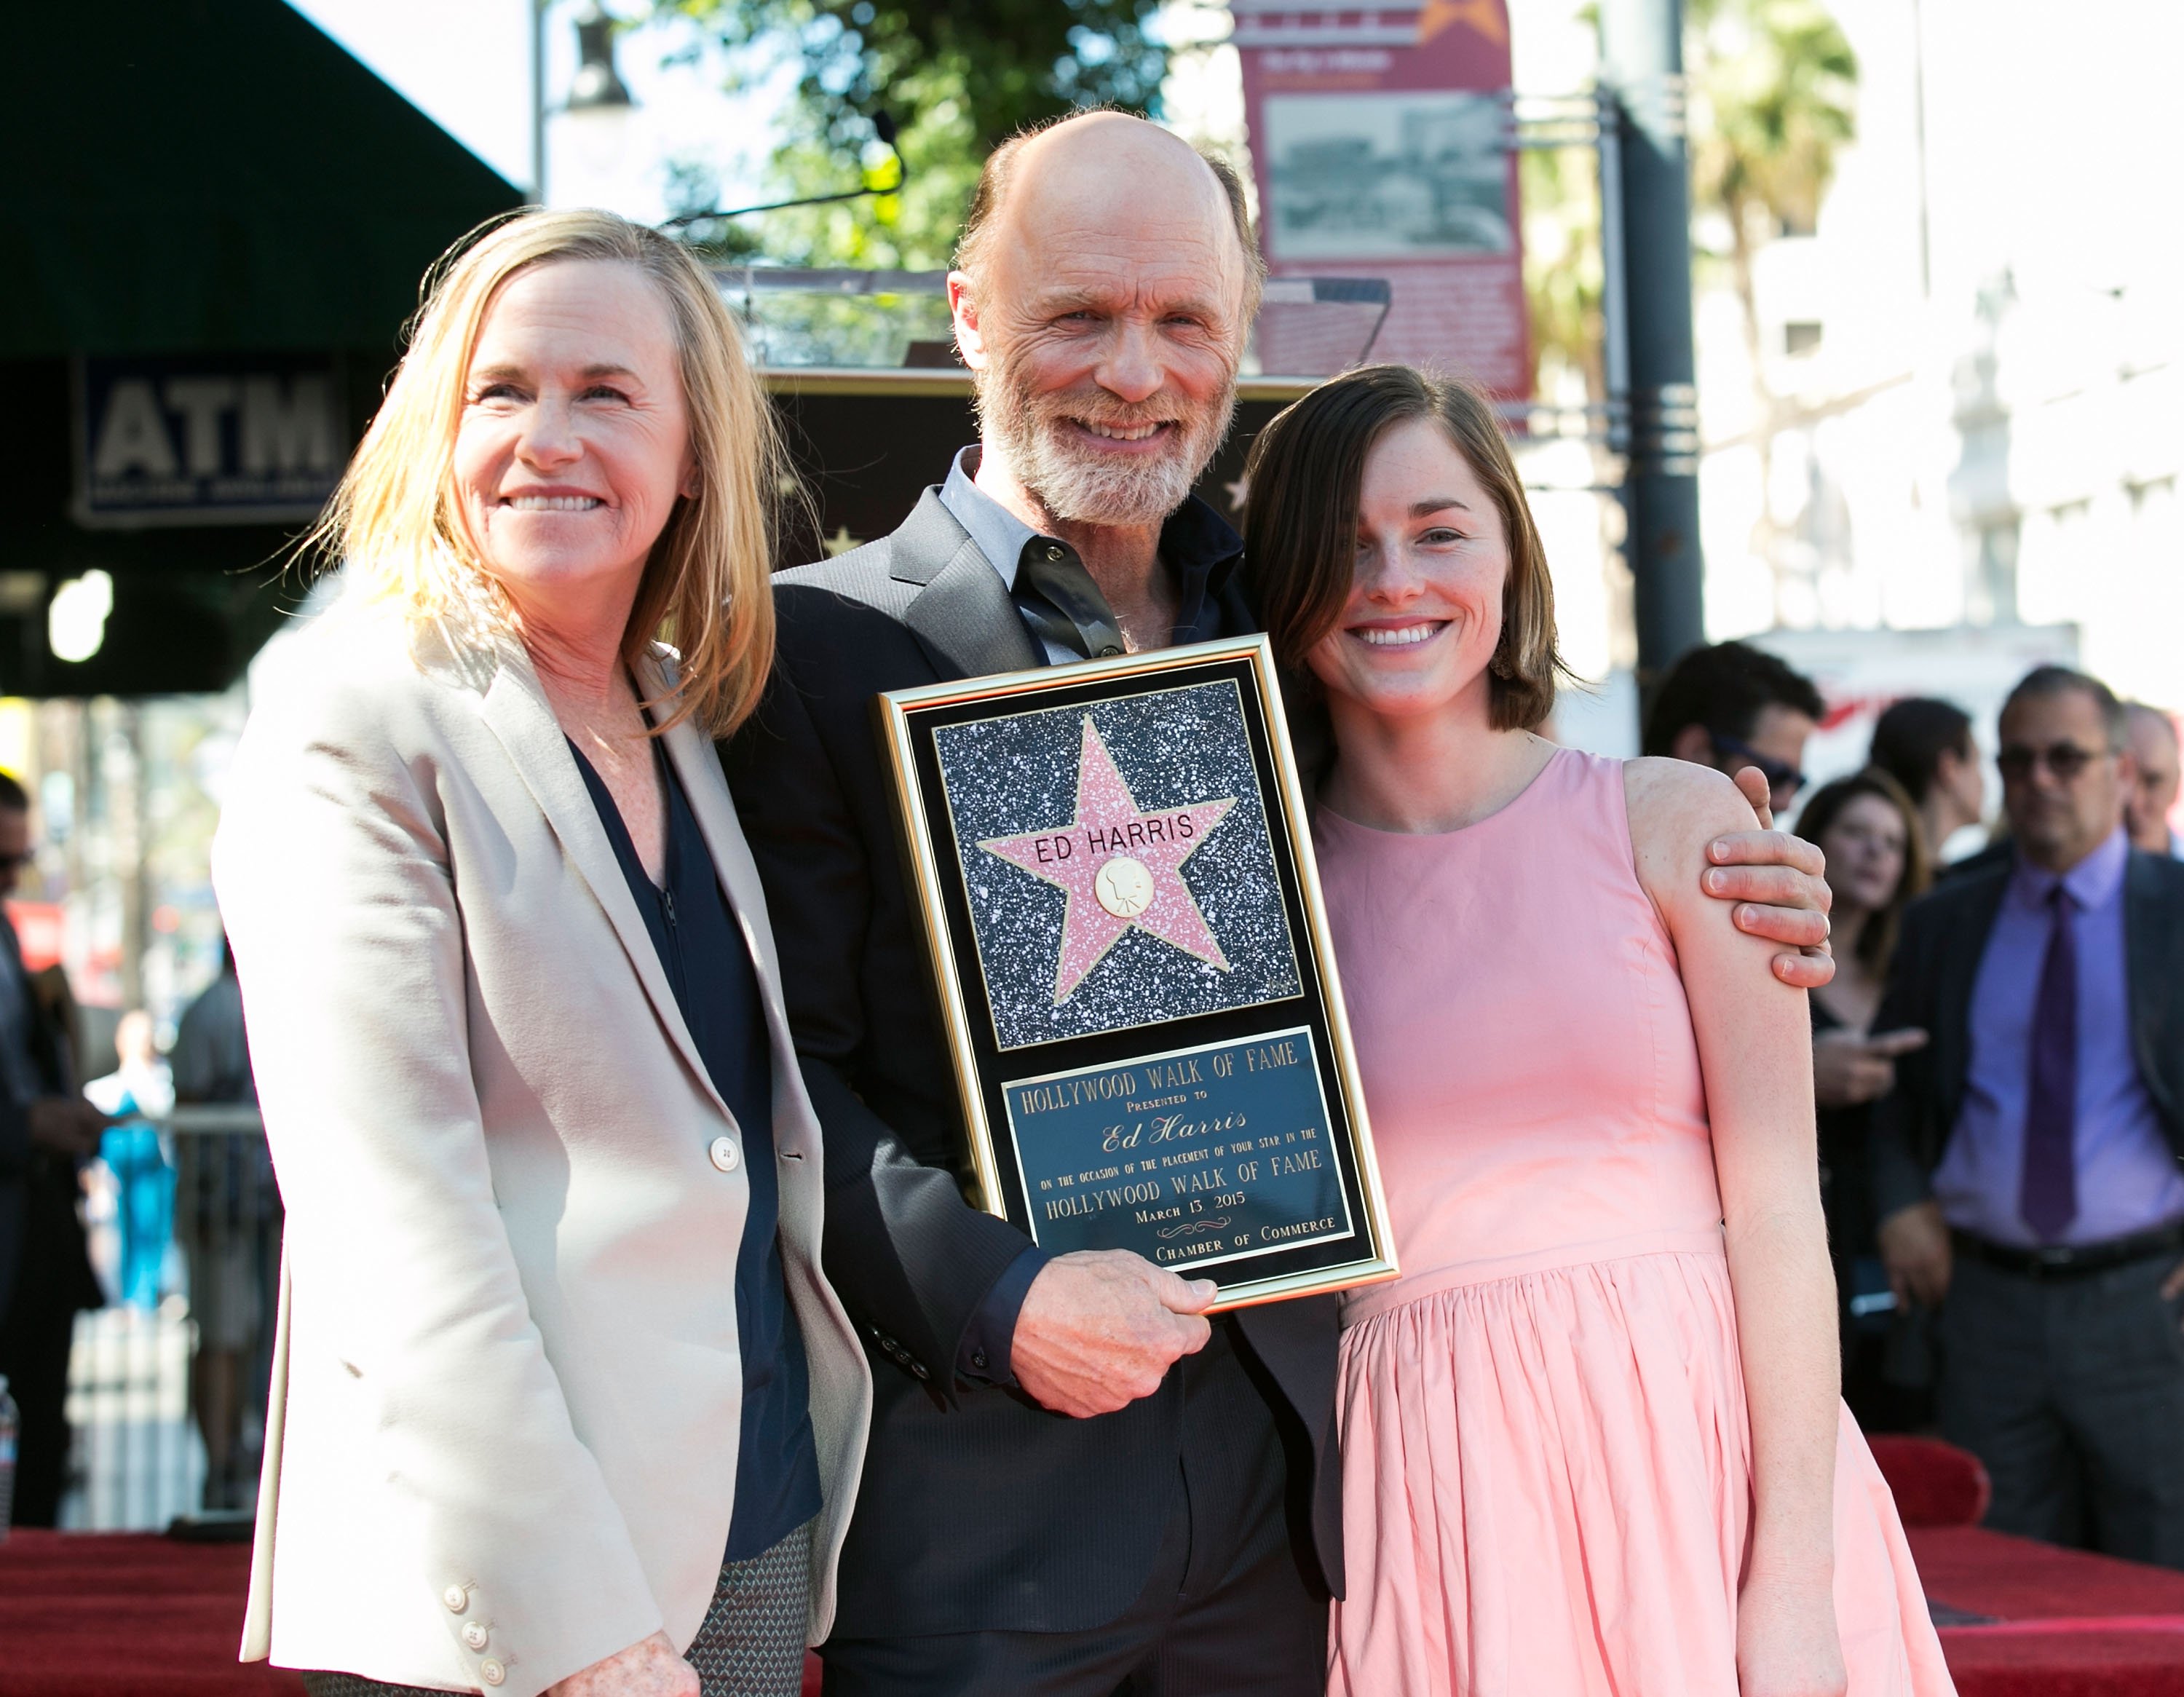 Amy Madigan, Ed Harris and Lily Dolores Harris attend The Hollywood Walk of Fame ceremony honoring Ed Harris on March 13, 2015 in Hollywood | Source: Getty Images